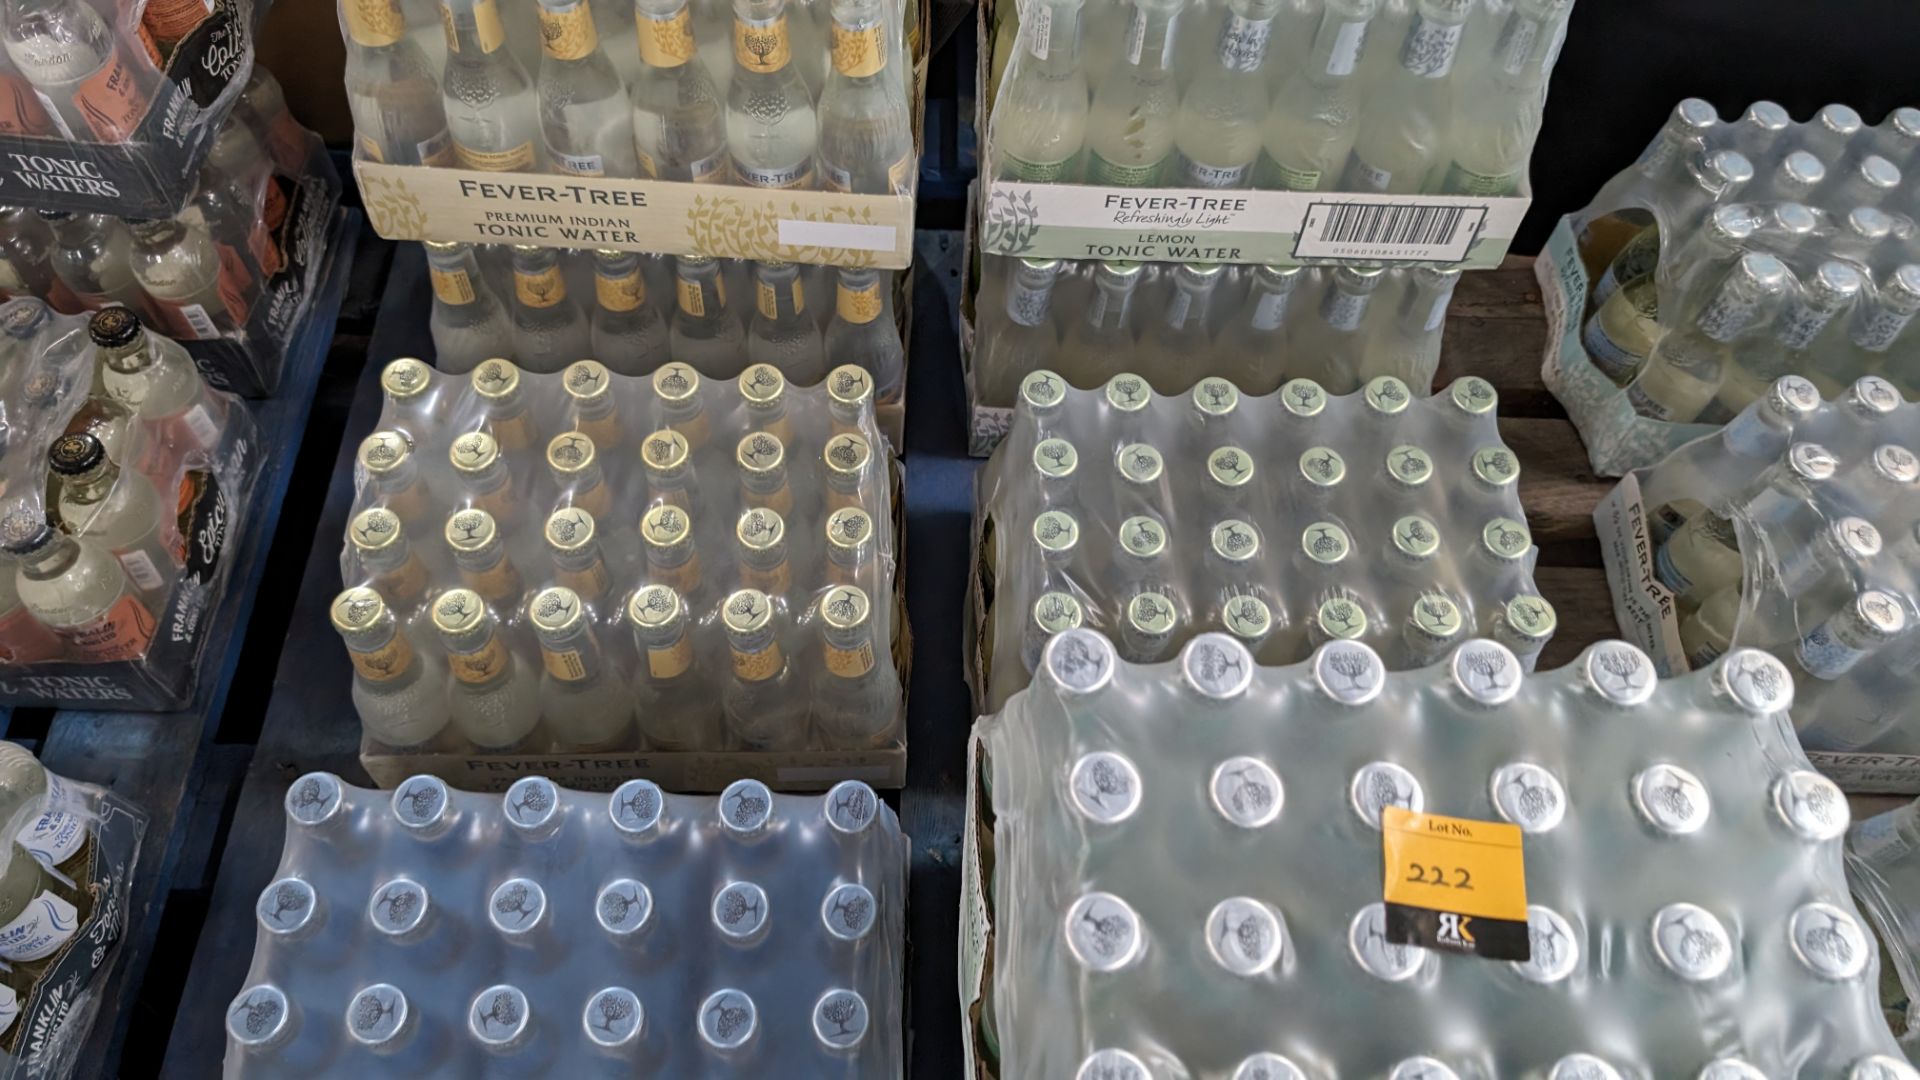 11 trays of Fever-Tree tonic water. NB: The Fever-Tree tonic water which comprises lots 219 to 222 - Image 5 of 6